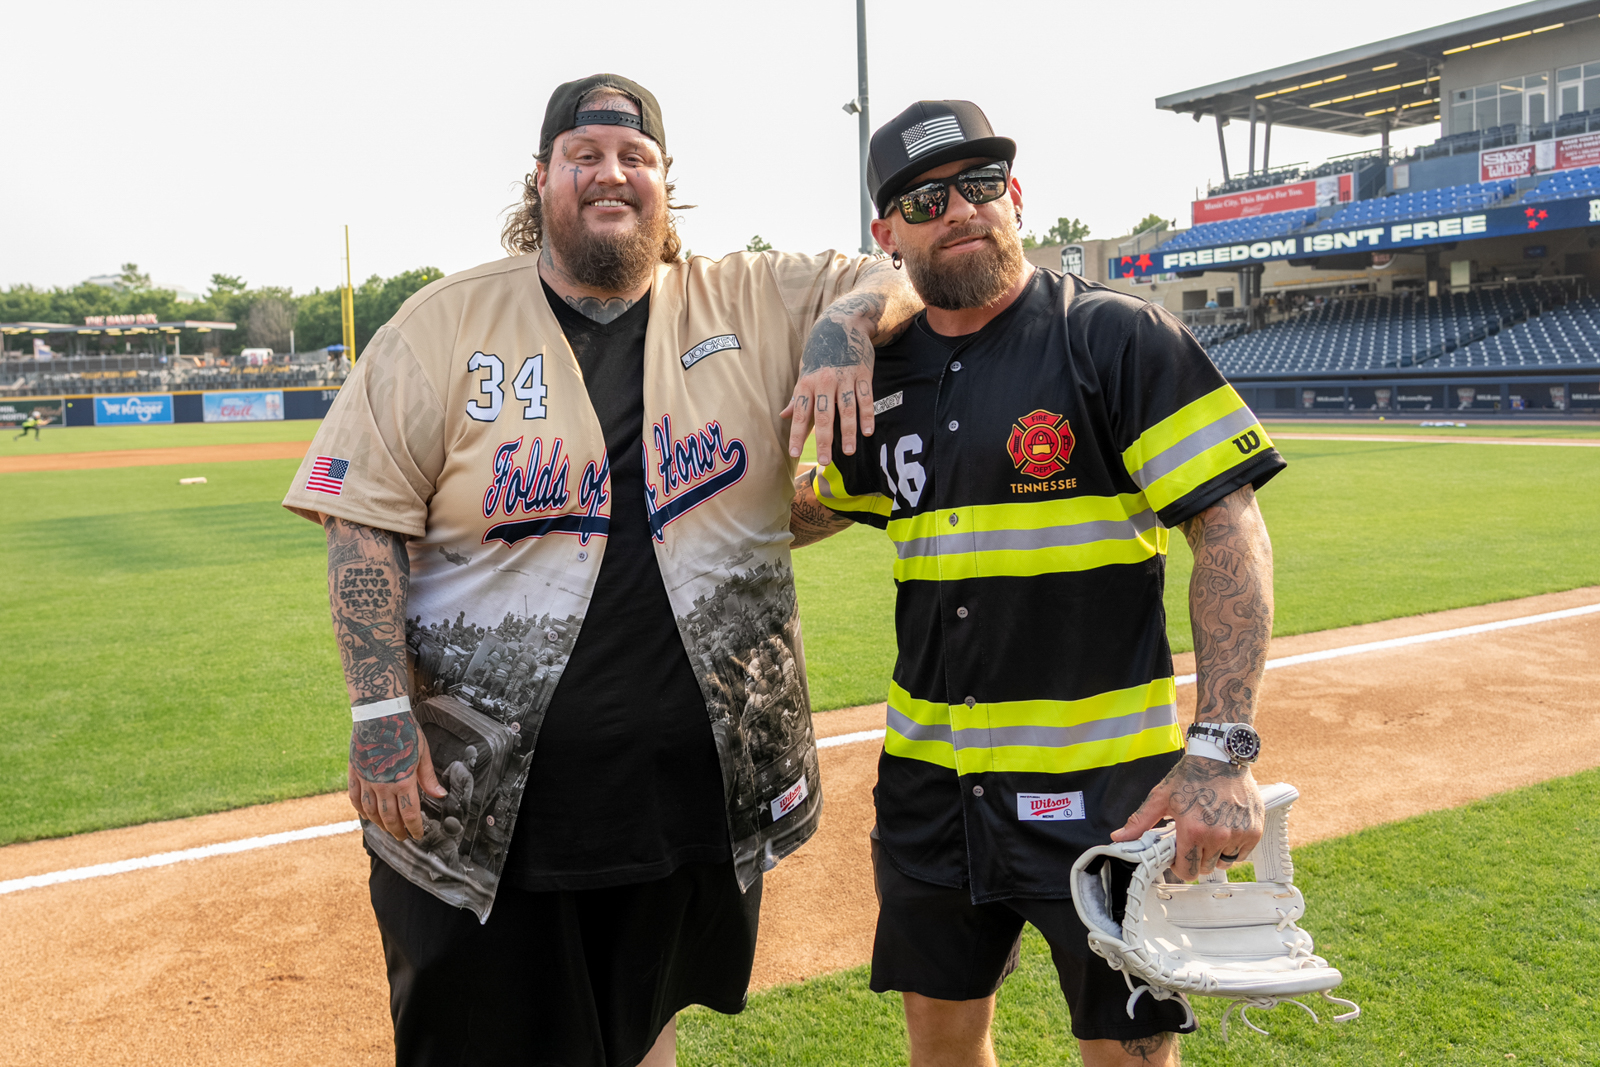 PHOTOS: 2nd Annual Rock 'N Jock Celebrity Softball Game Featuring